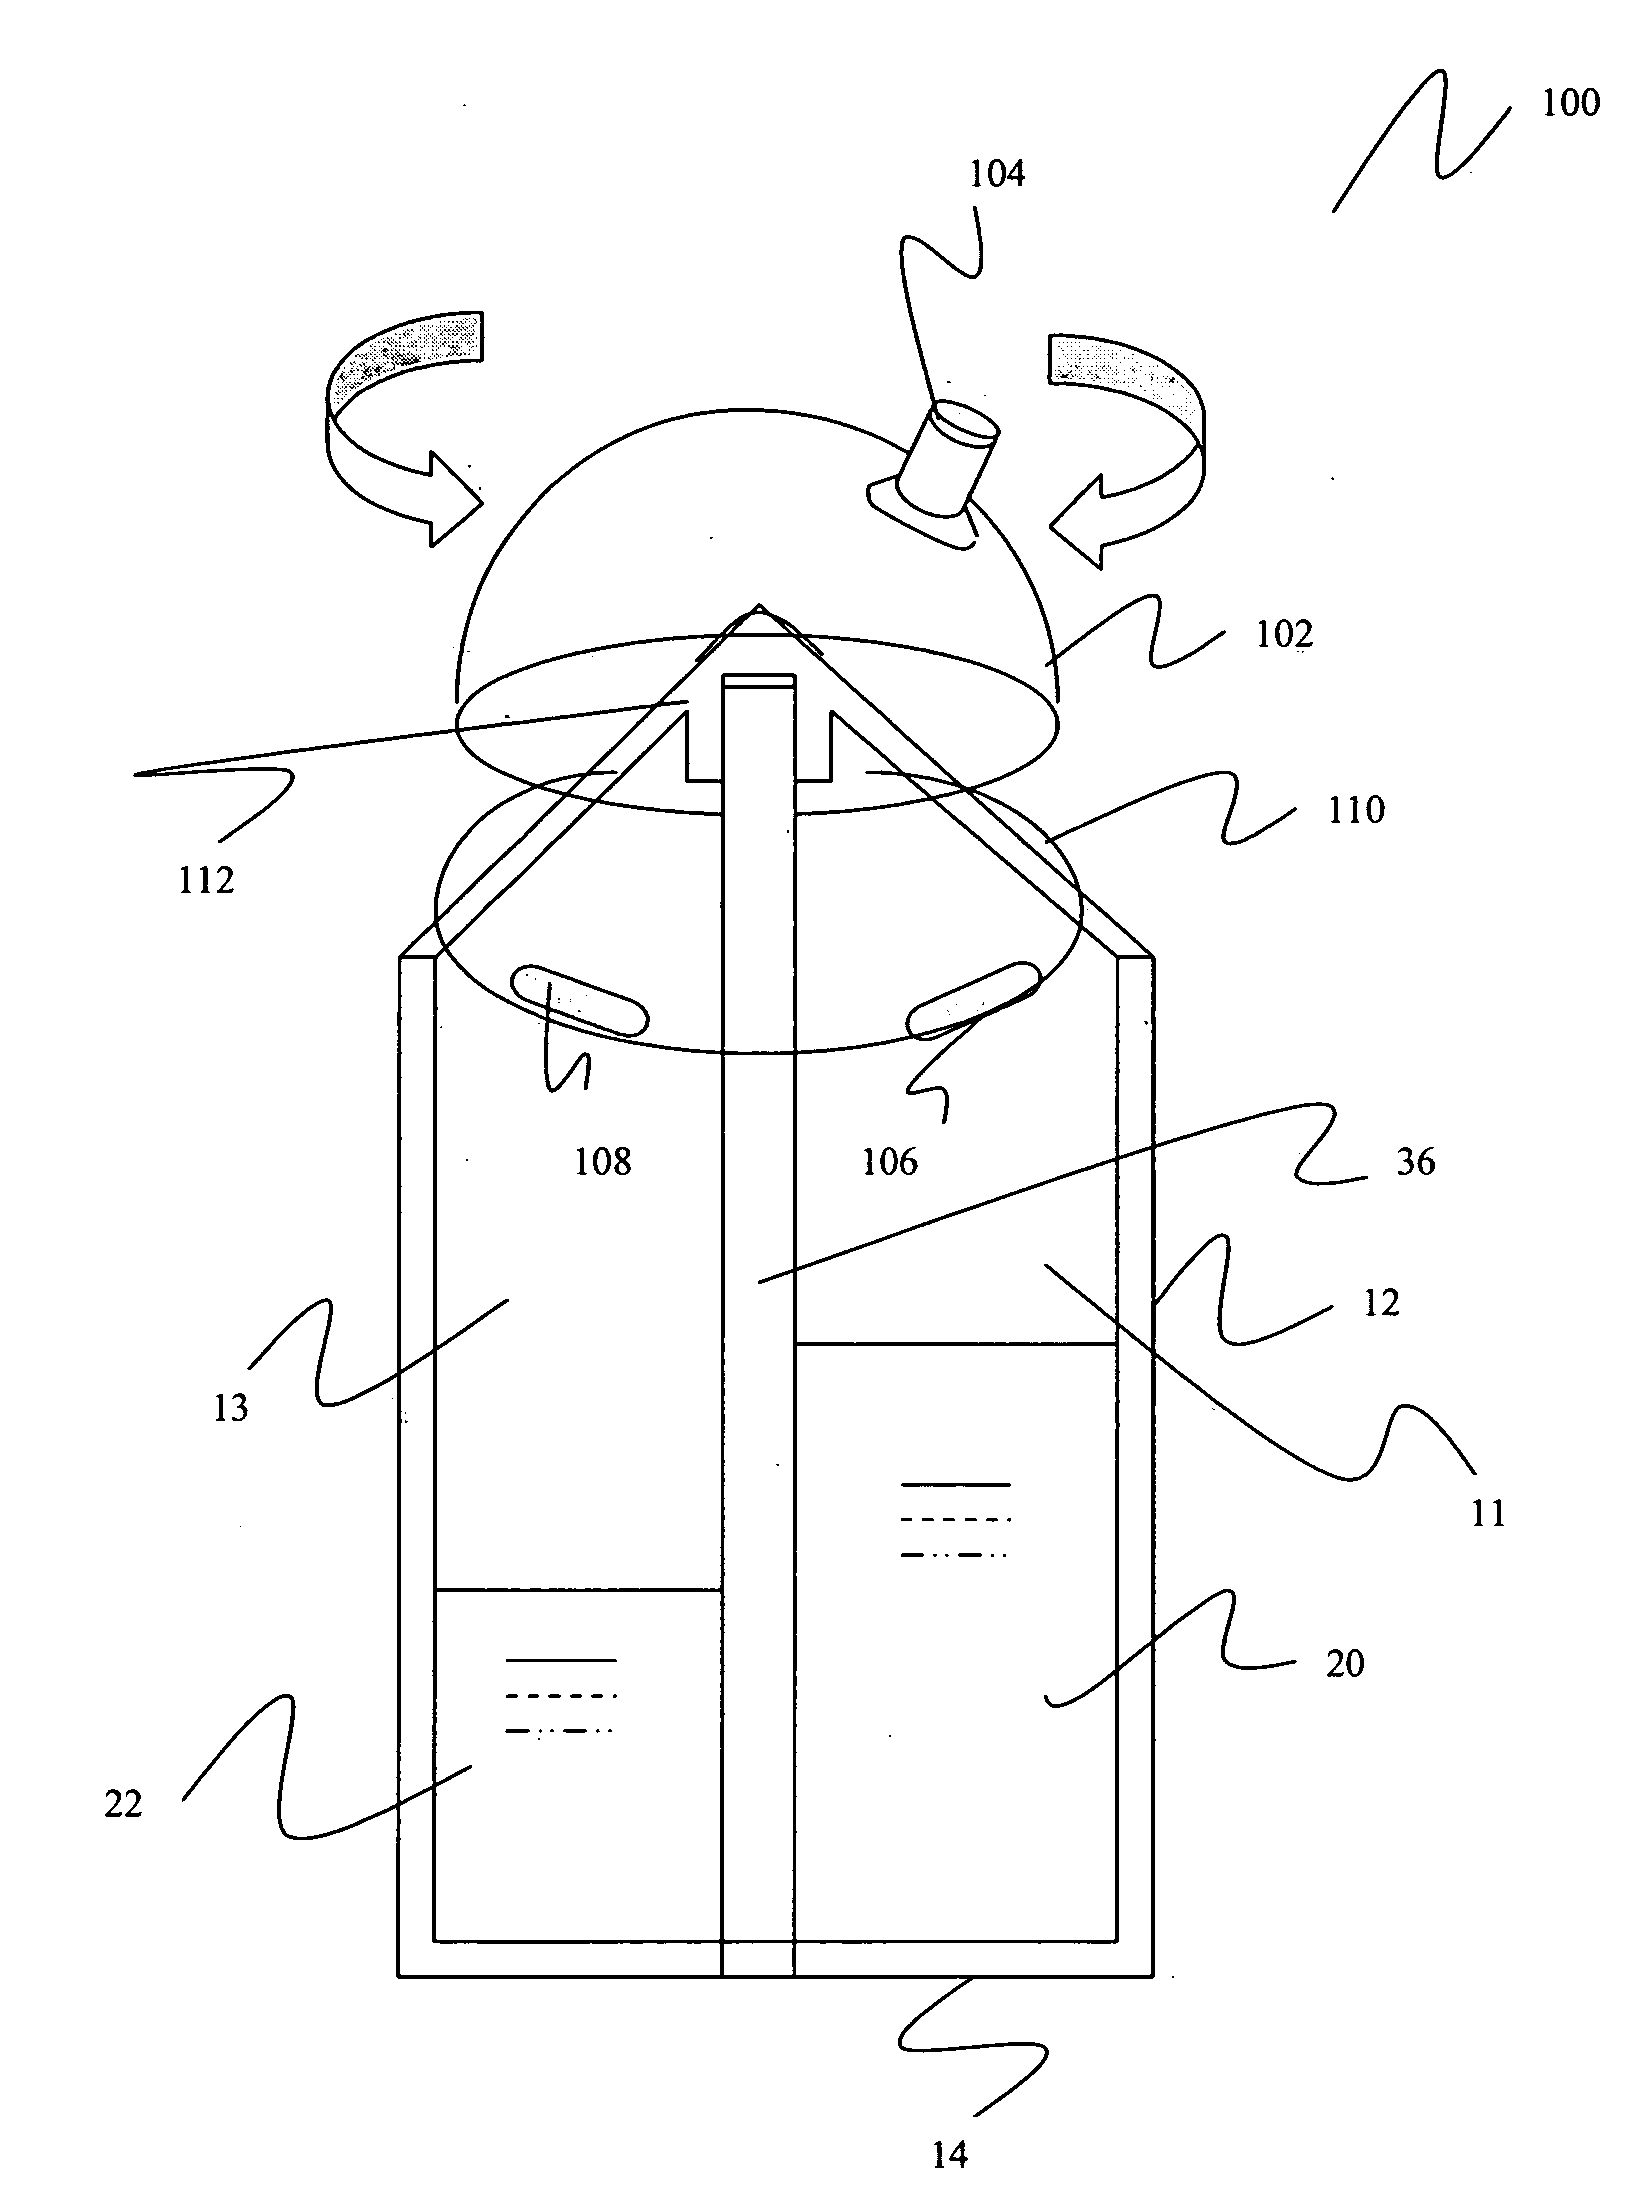 Multi-chambered bottles for separating contents and methods of manufacturing the same